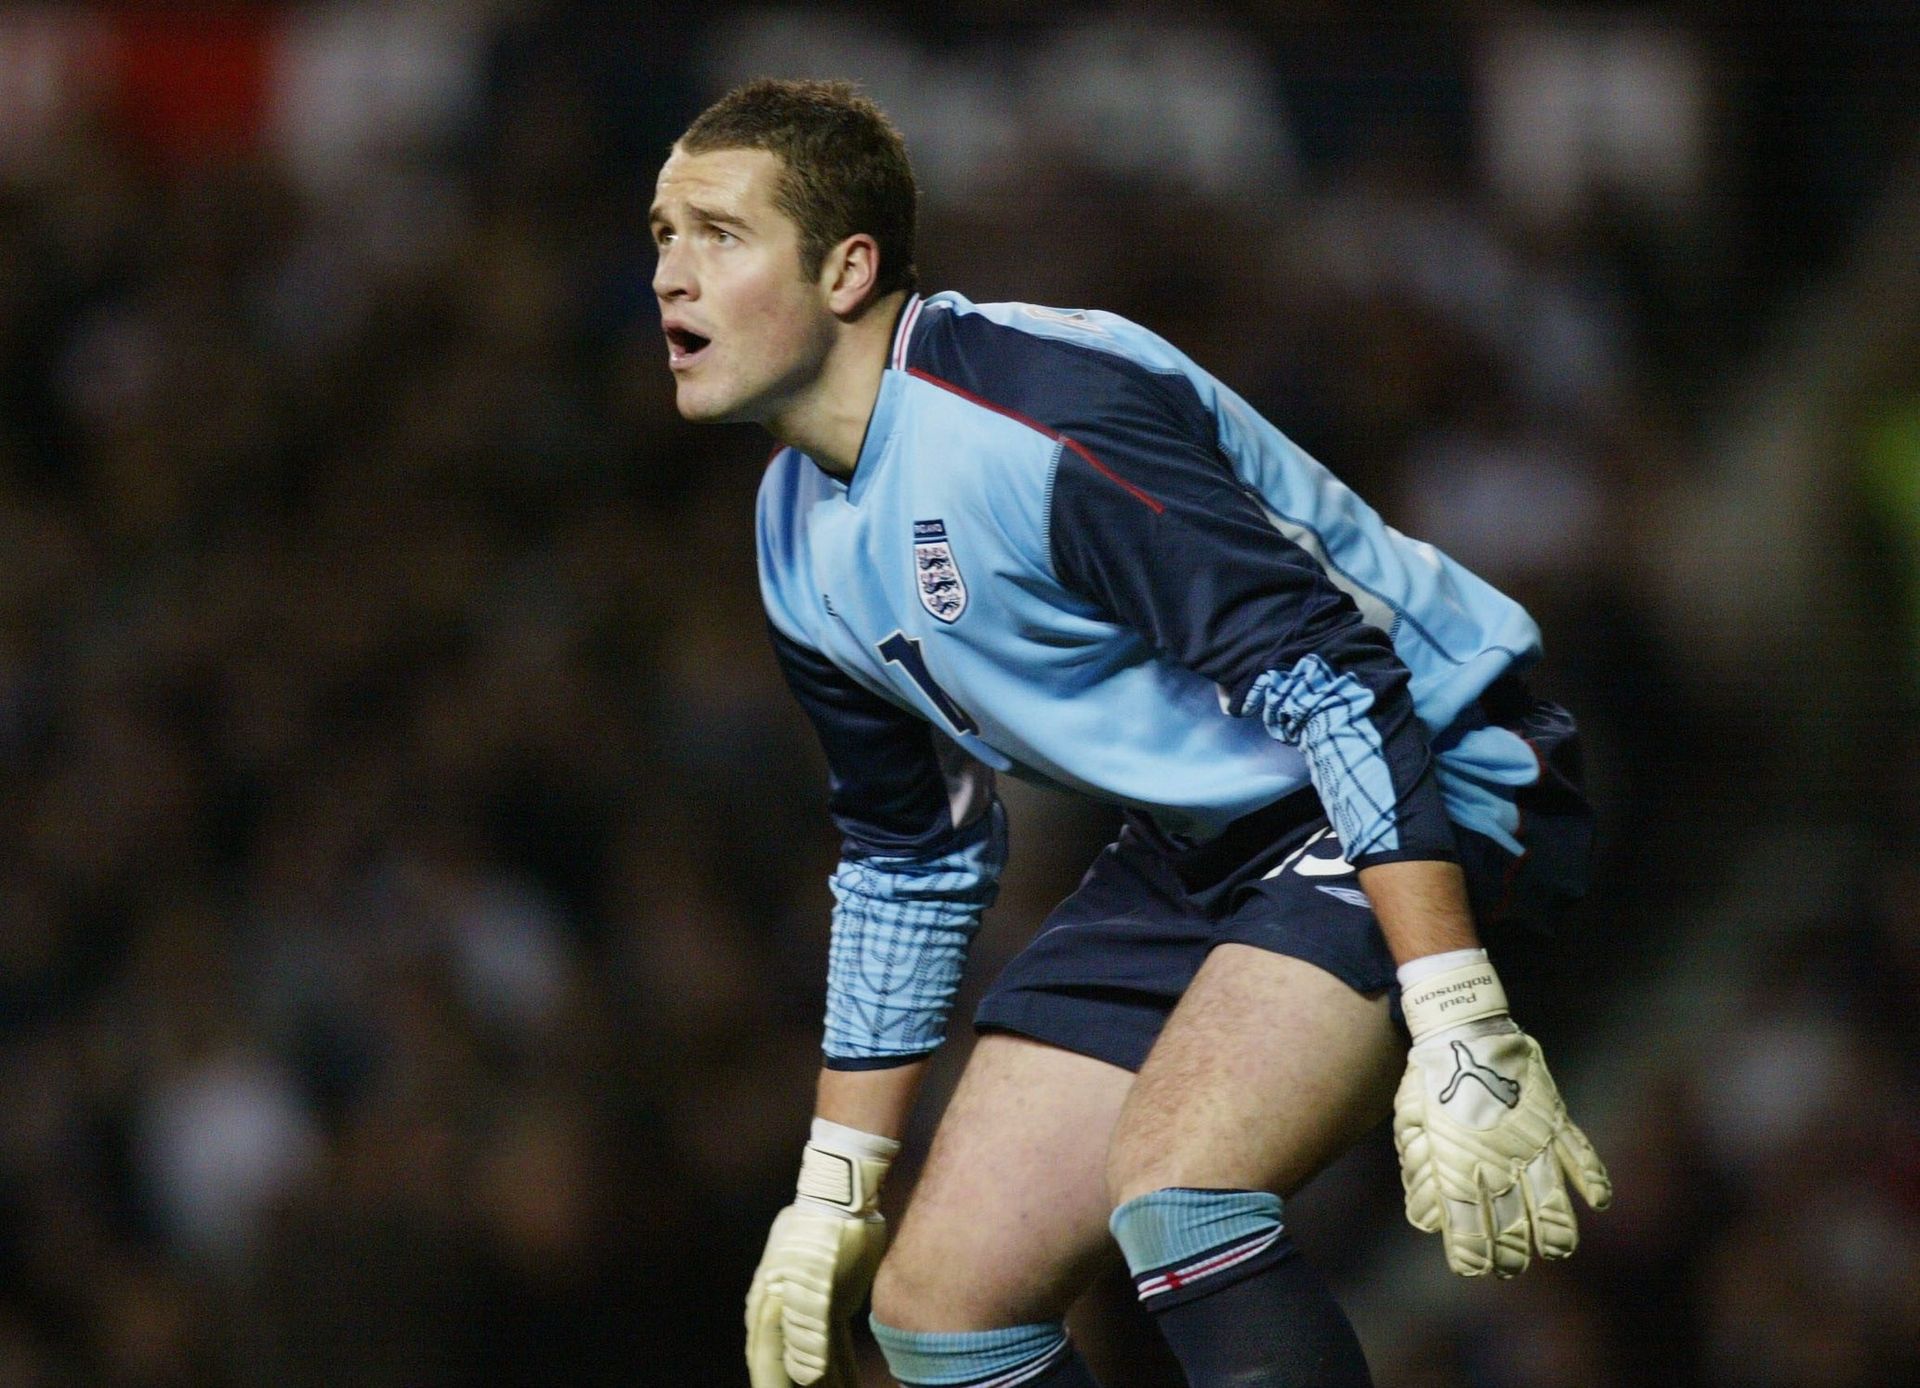 <p>                     Paul Robinson was a fine goalkeeper for England in the mid-2000s but ultimately lost his place following a decline in form and confidence in 2007.                   </p>                                      <p>                     Robinson won 41 caps overall and was in goal for the Three Lions at the 2006 World Cup. He also scored two goals in his career – a header for Leeds against Swindon in 2004 and a free-kick from his own half for Tottenham versus Watford in 2007.                   </p>